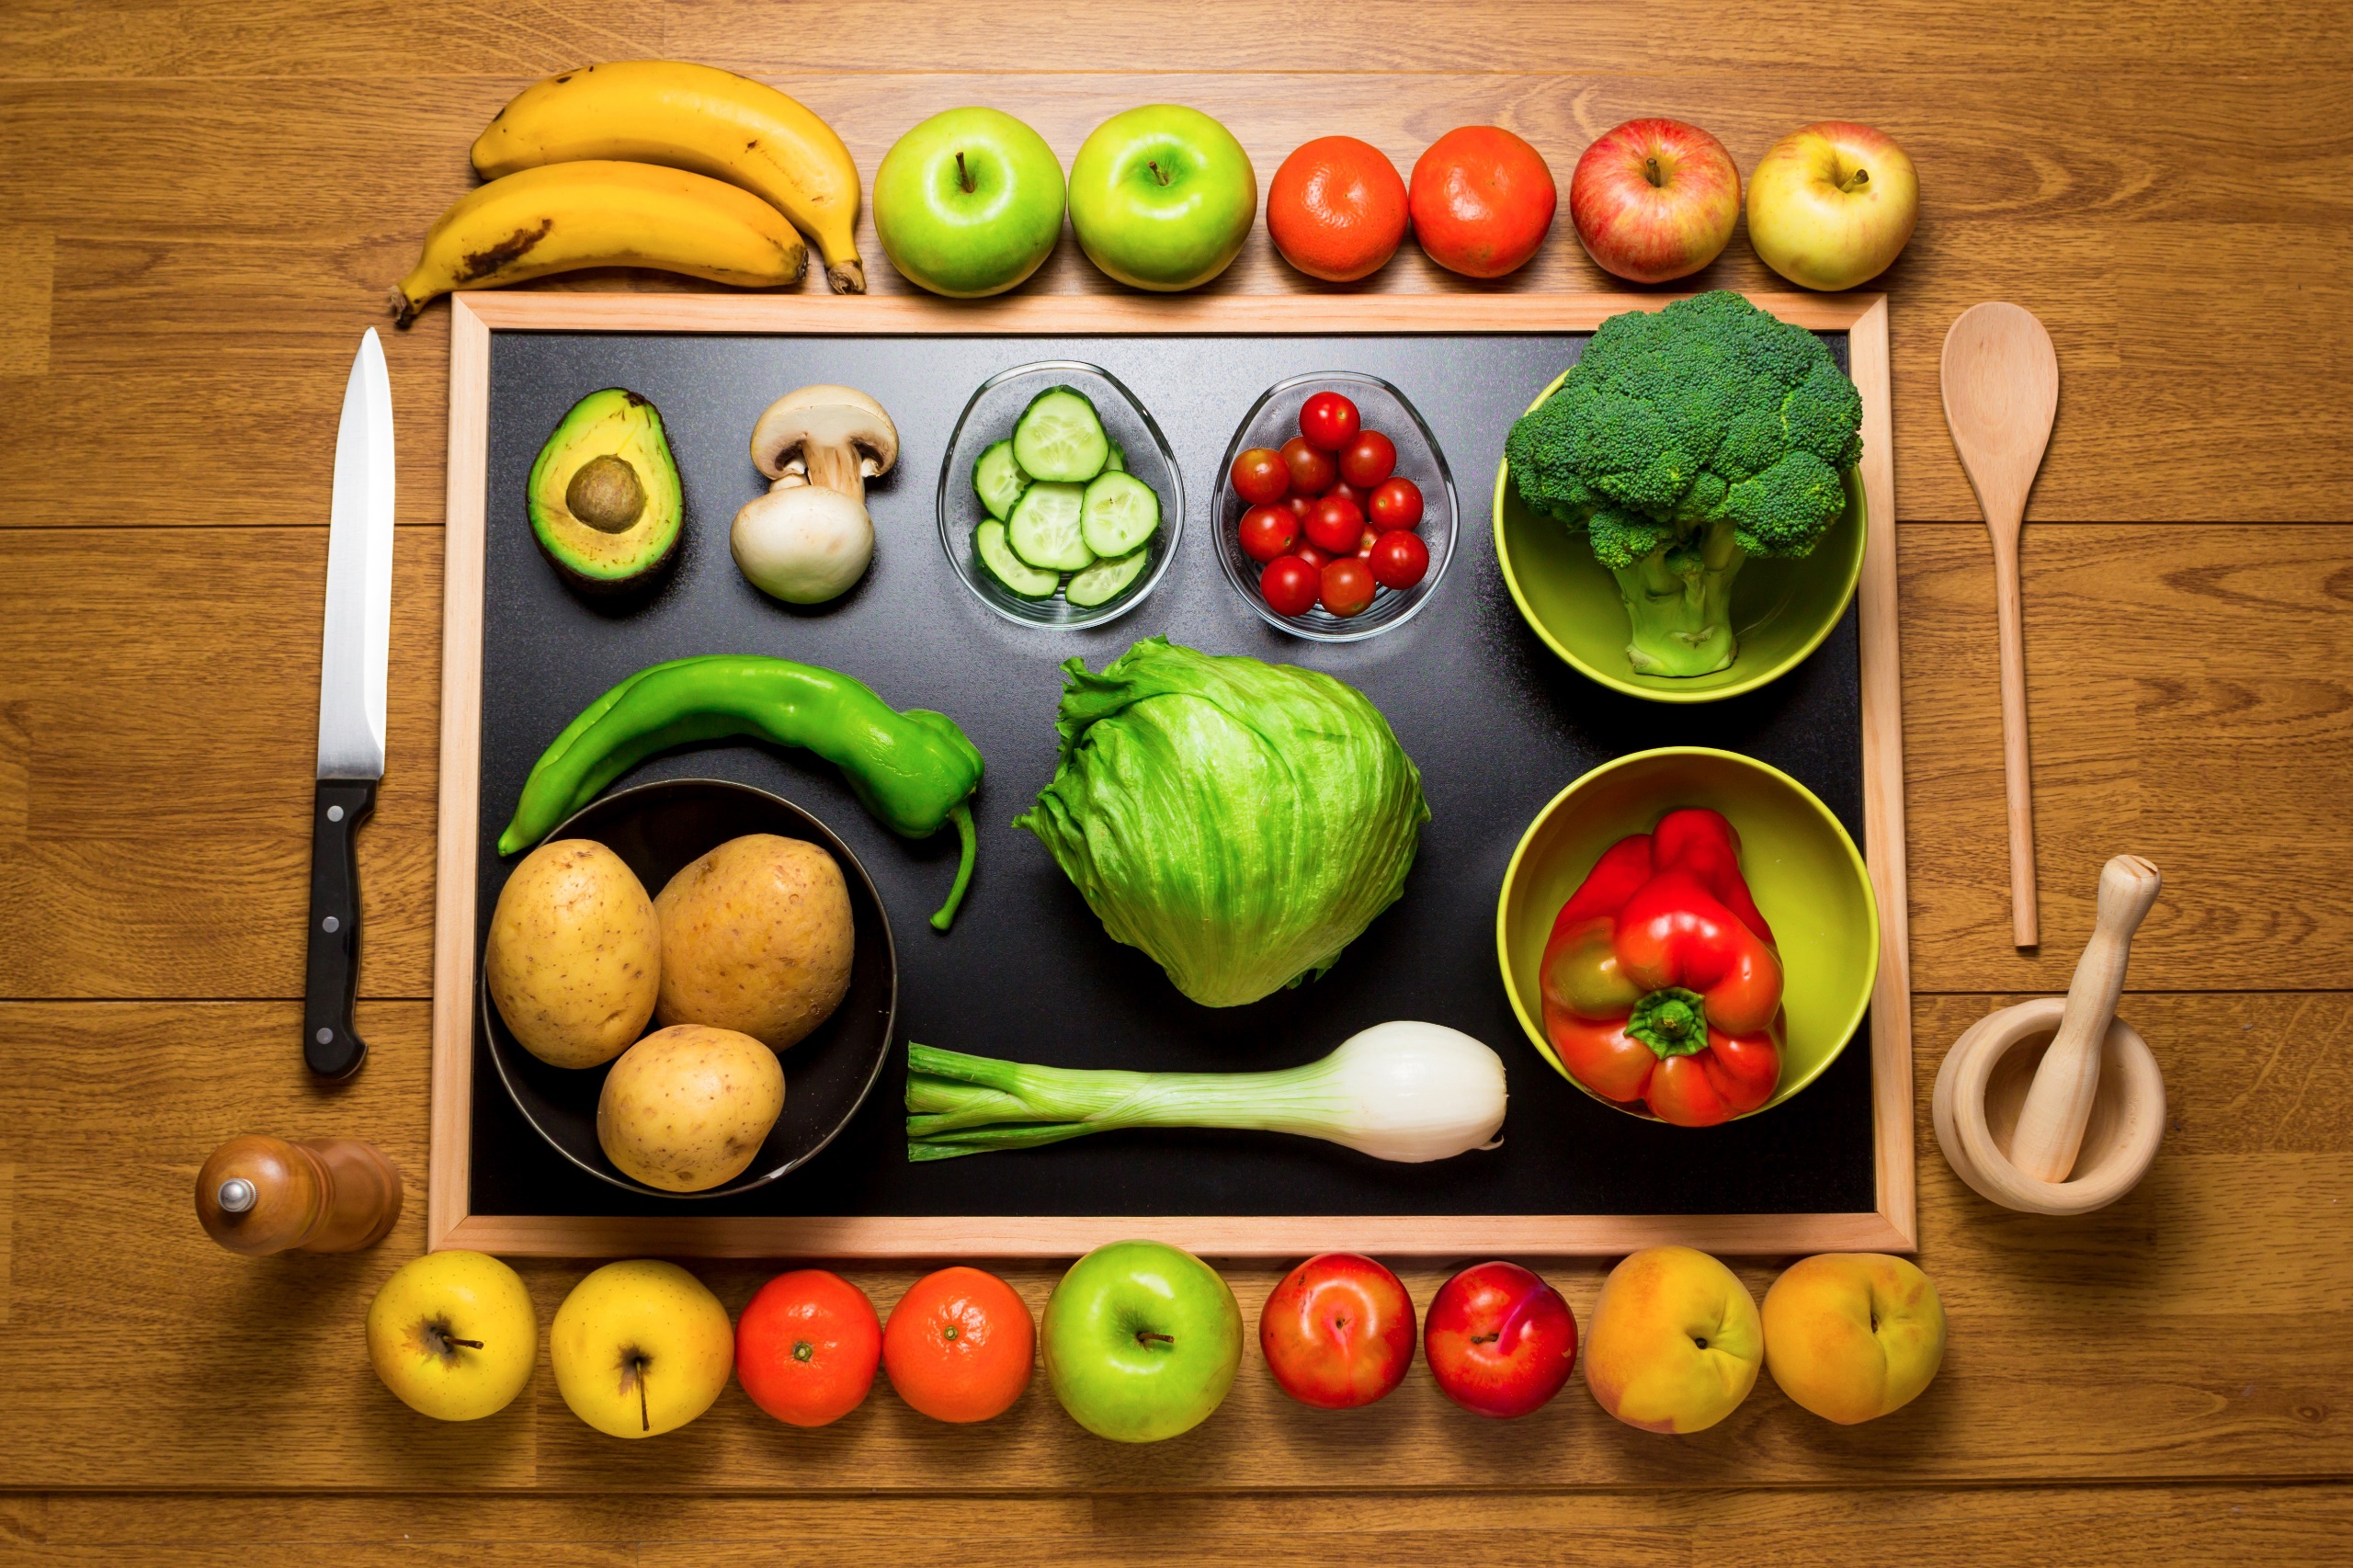 General 2560x1706 food vegetables knife fruit closeup top view potatoes apples orange (fruit) peaches bell peppers cabbage bananas pepper spoon tomatoes mushroom Avocado wooden spoon wooden surface onion